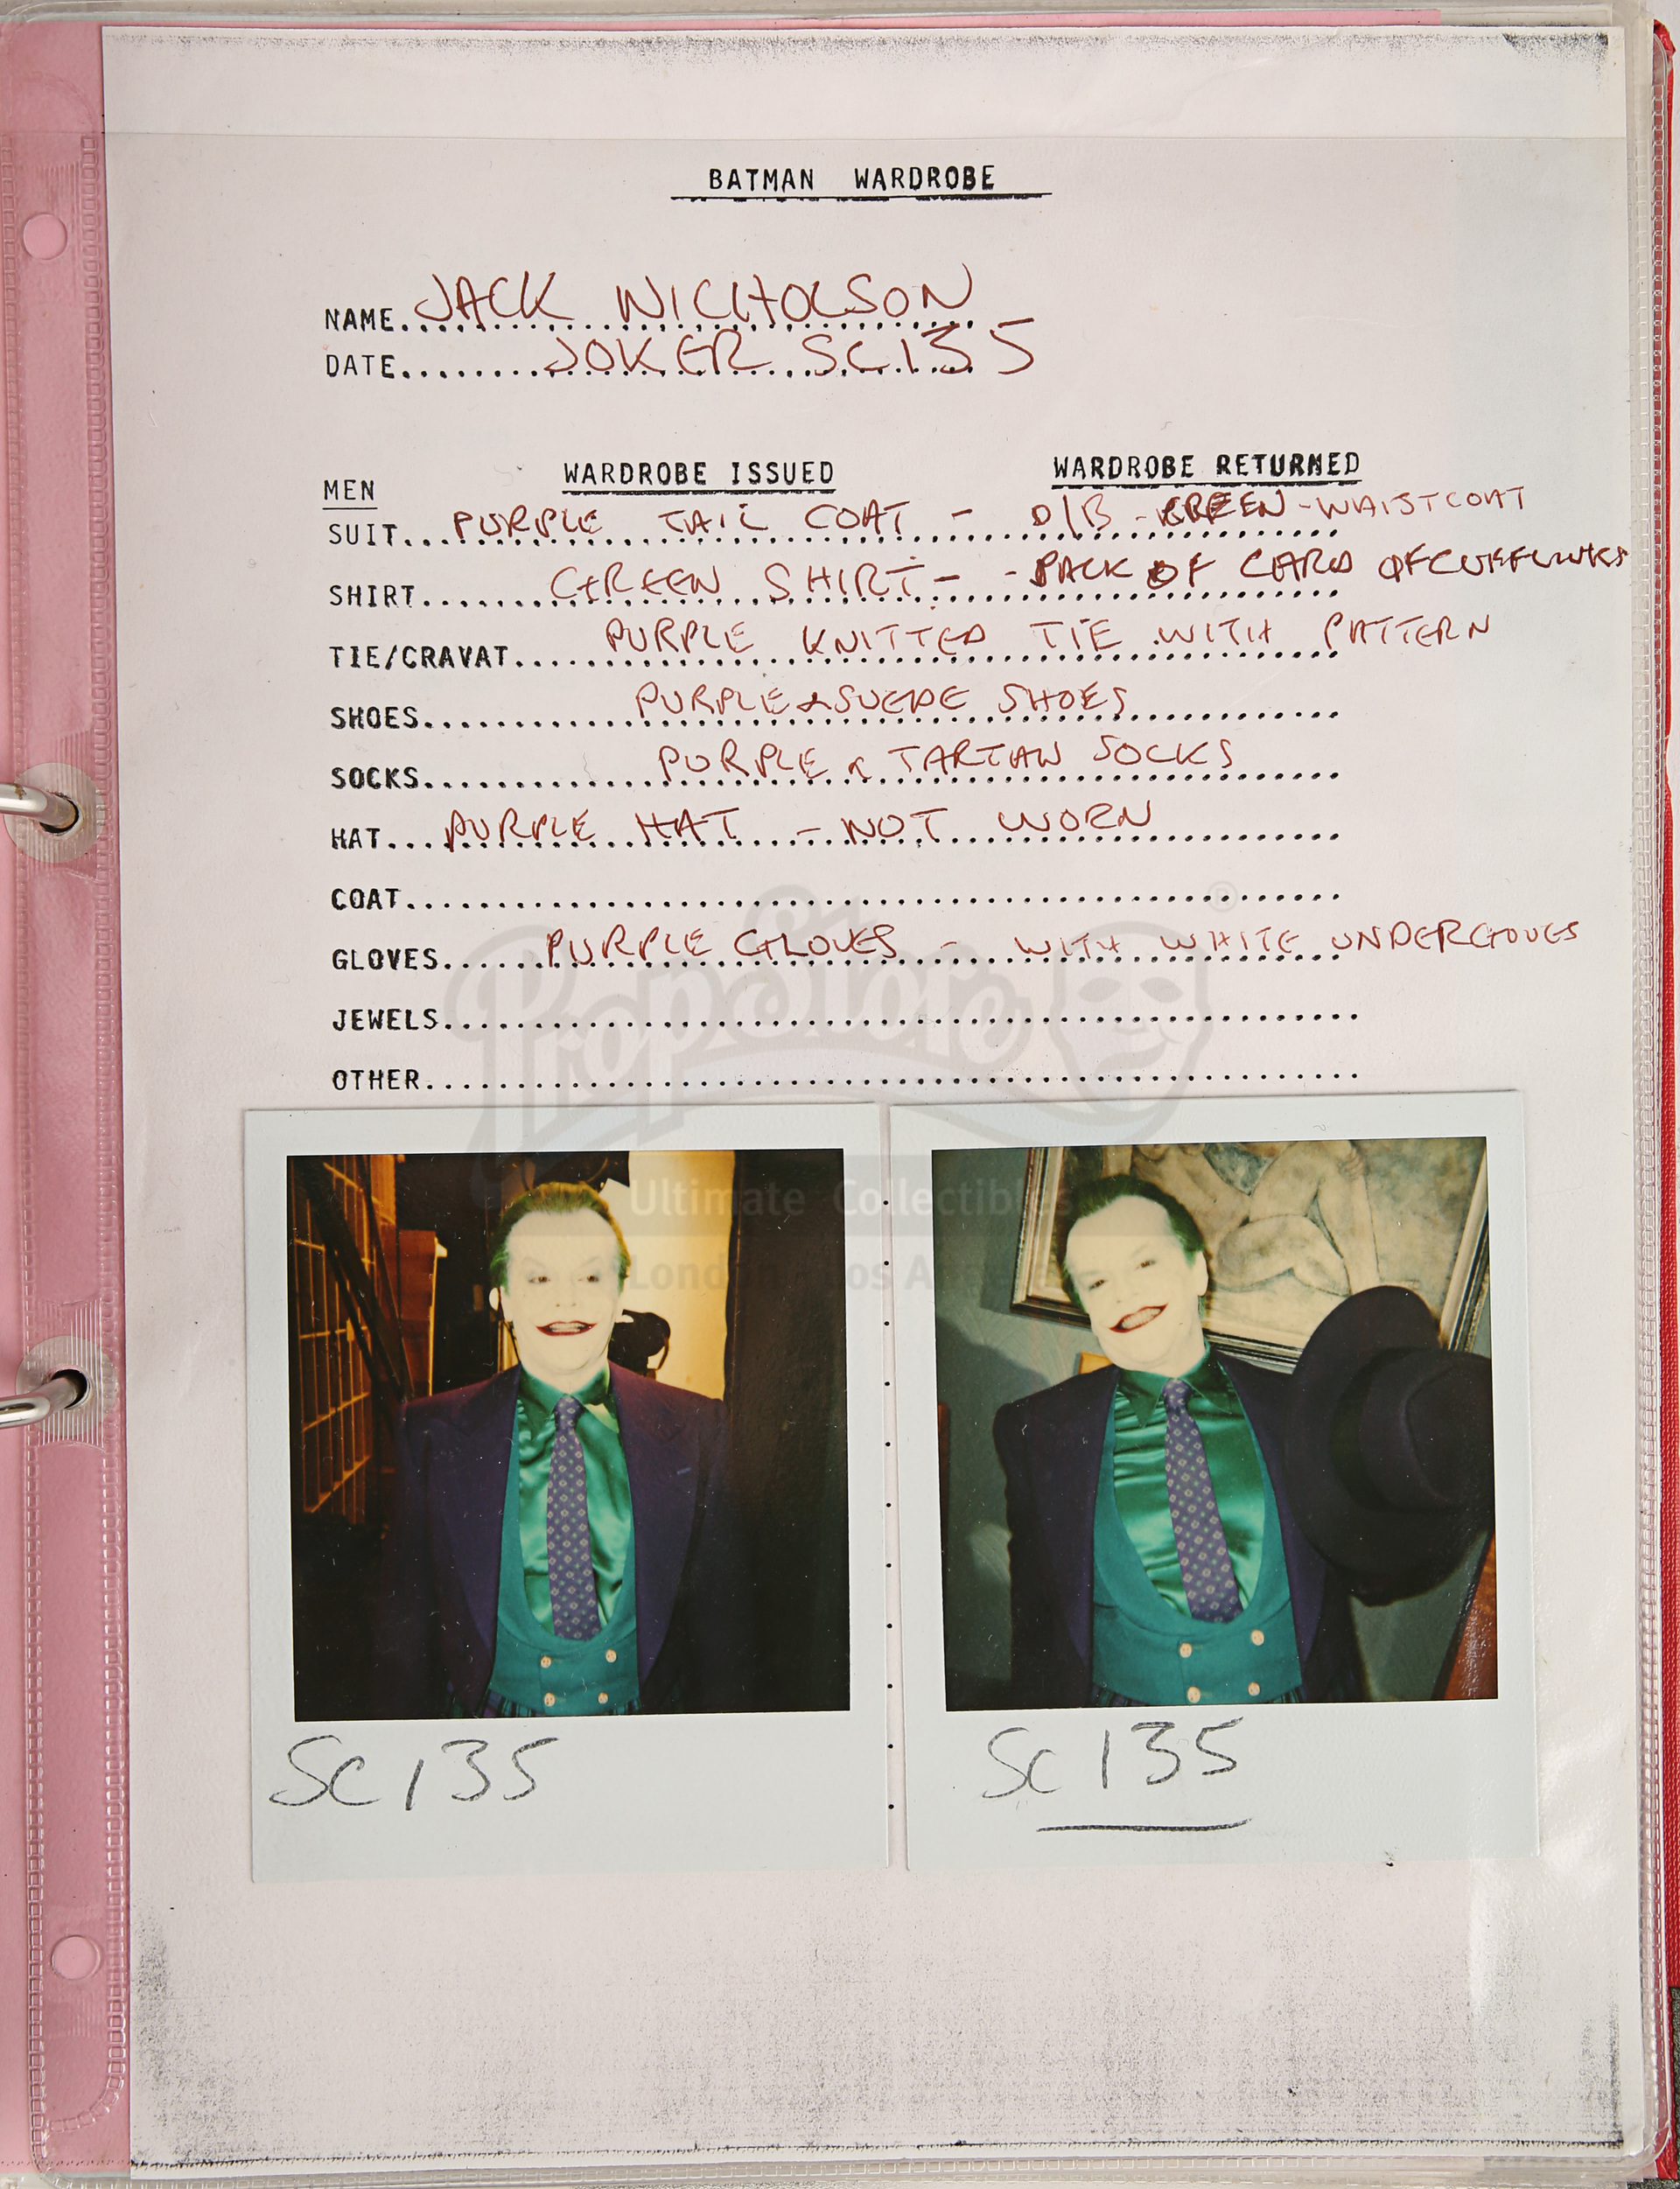 BATMAN (1989) - Costume Continuity Binder Featuring Archive of Main Cast Polaroids - Image 19 of 51